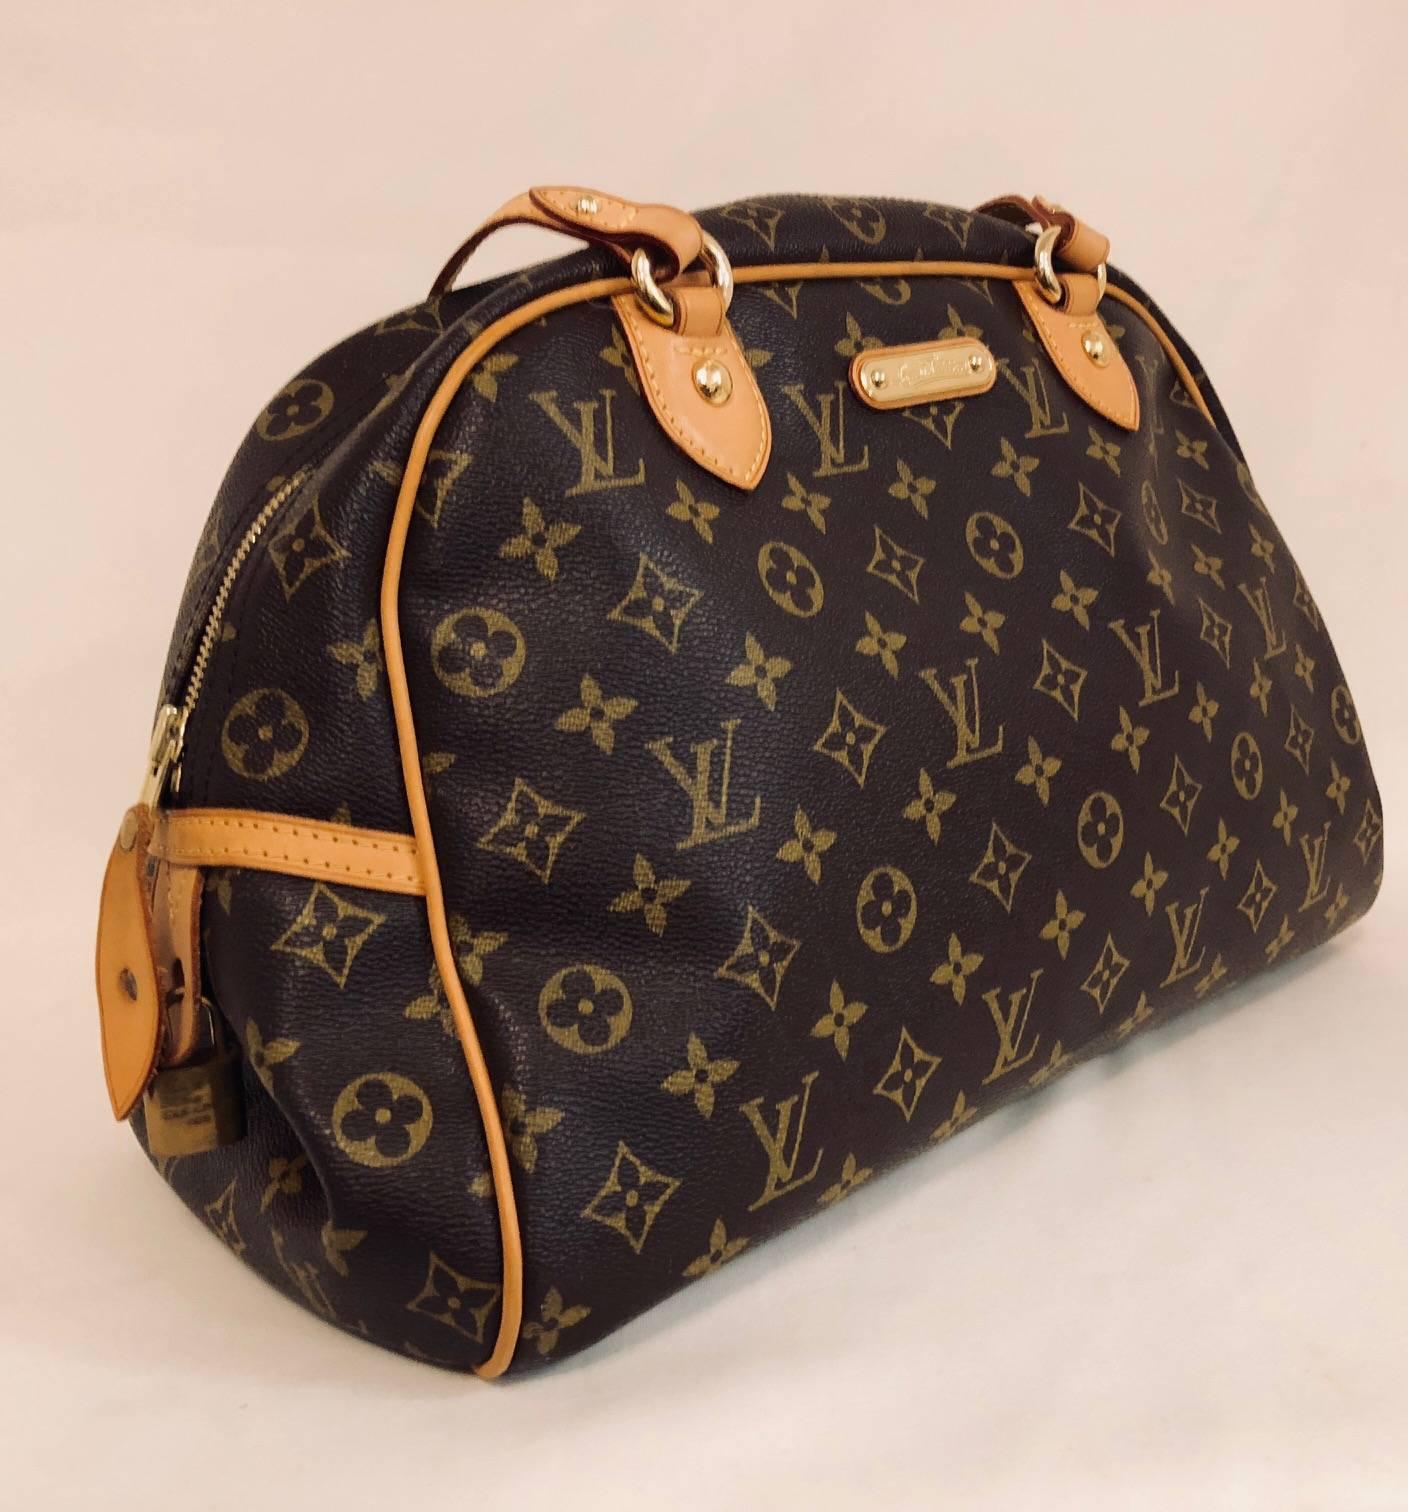 Louis Vuitton's reputation as one of the most highly respected purveyor of luxury goods is unquestioned.  This satchel features Louis Vuitton's signature monogram canvas, vachetta leather trim, brass hardware and top zipper.  Double flat straps